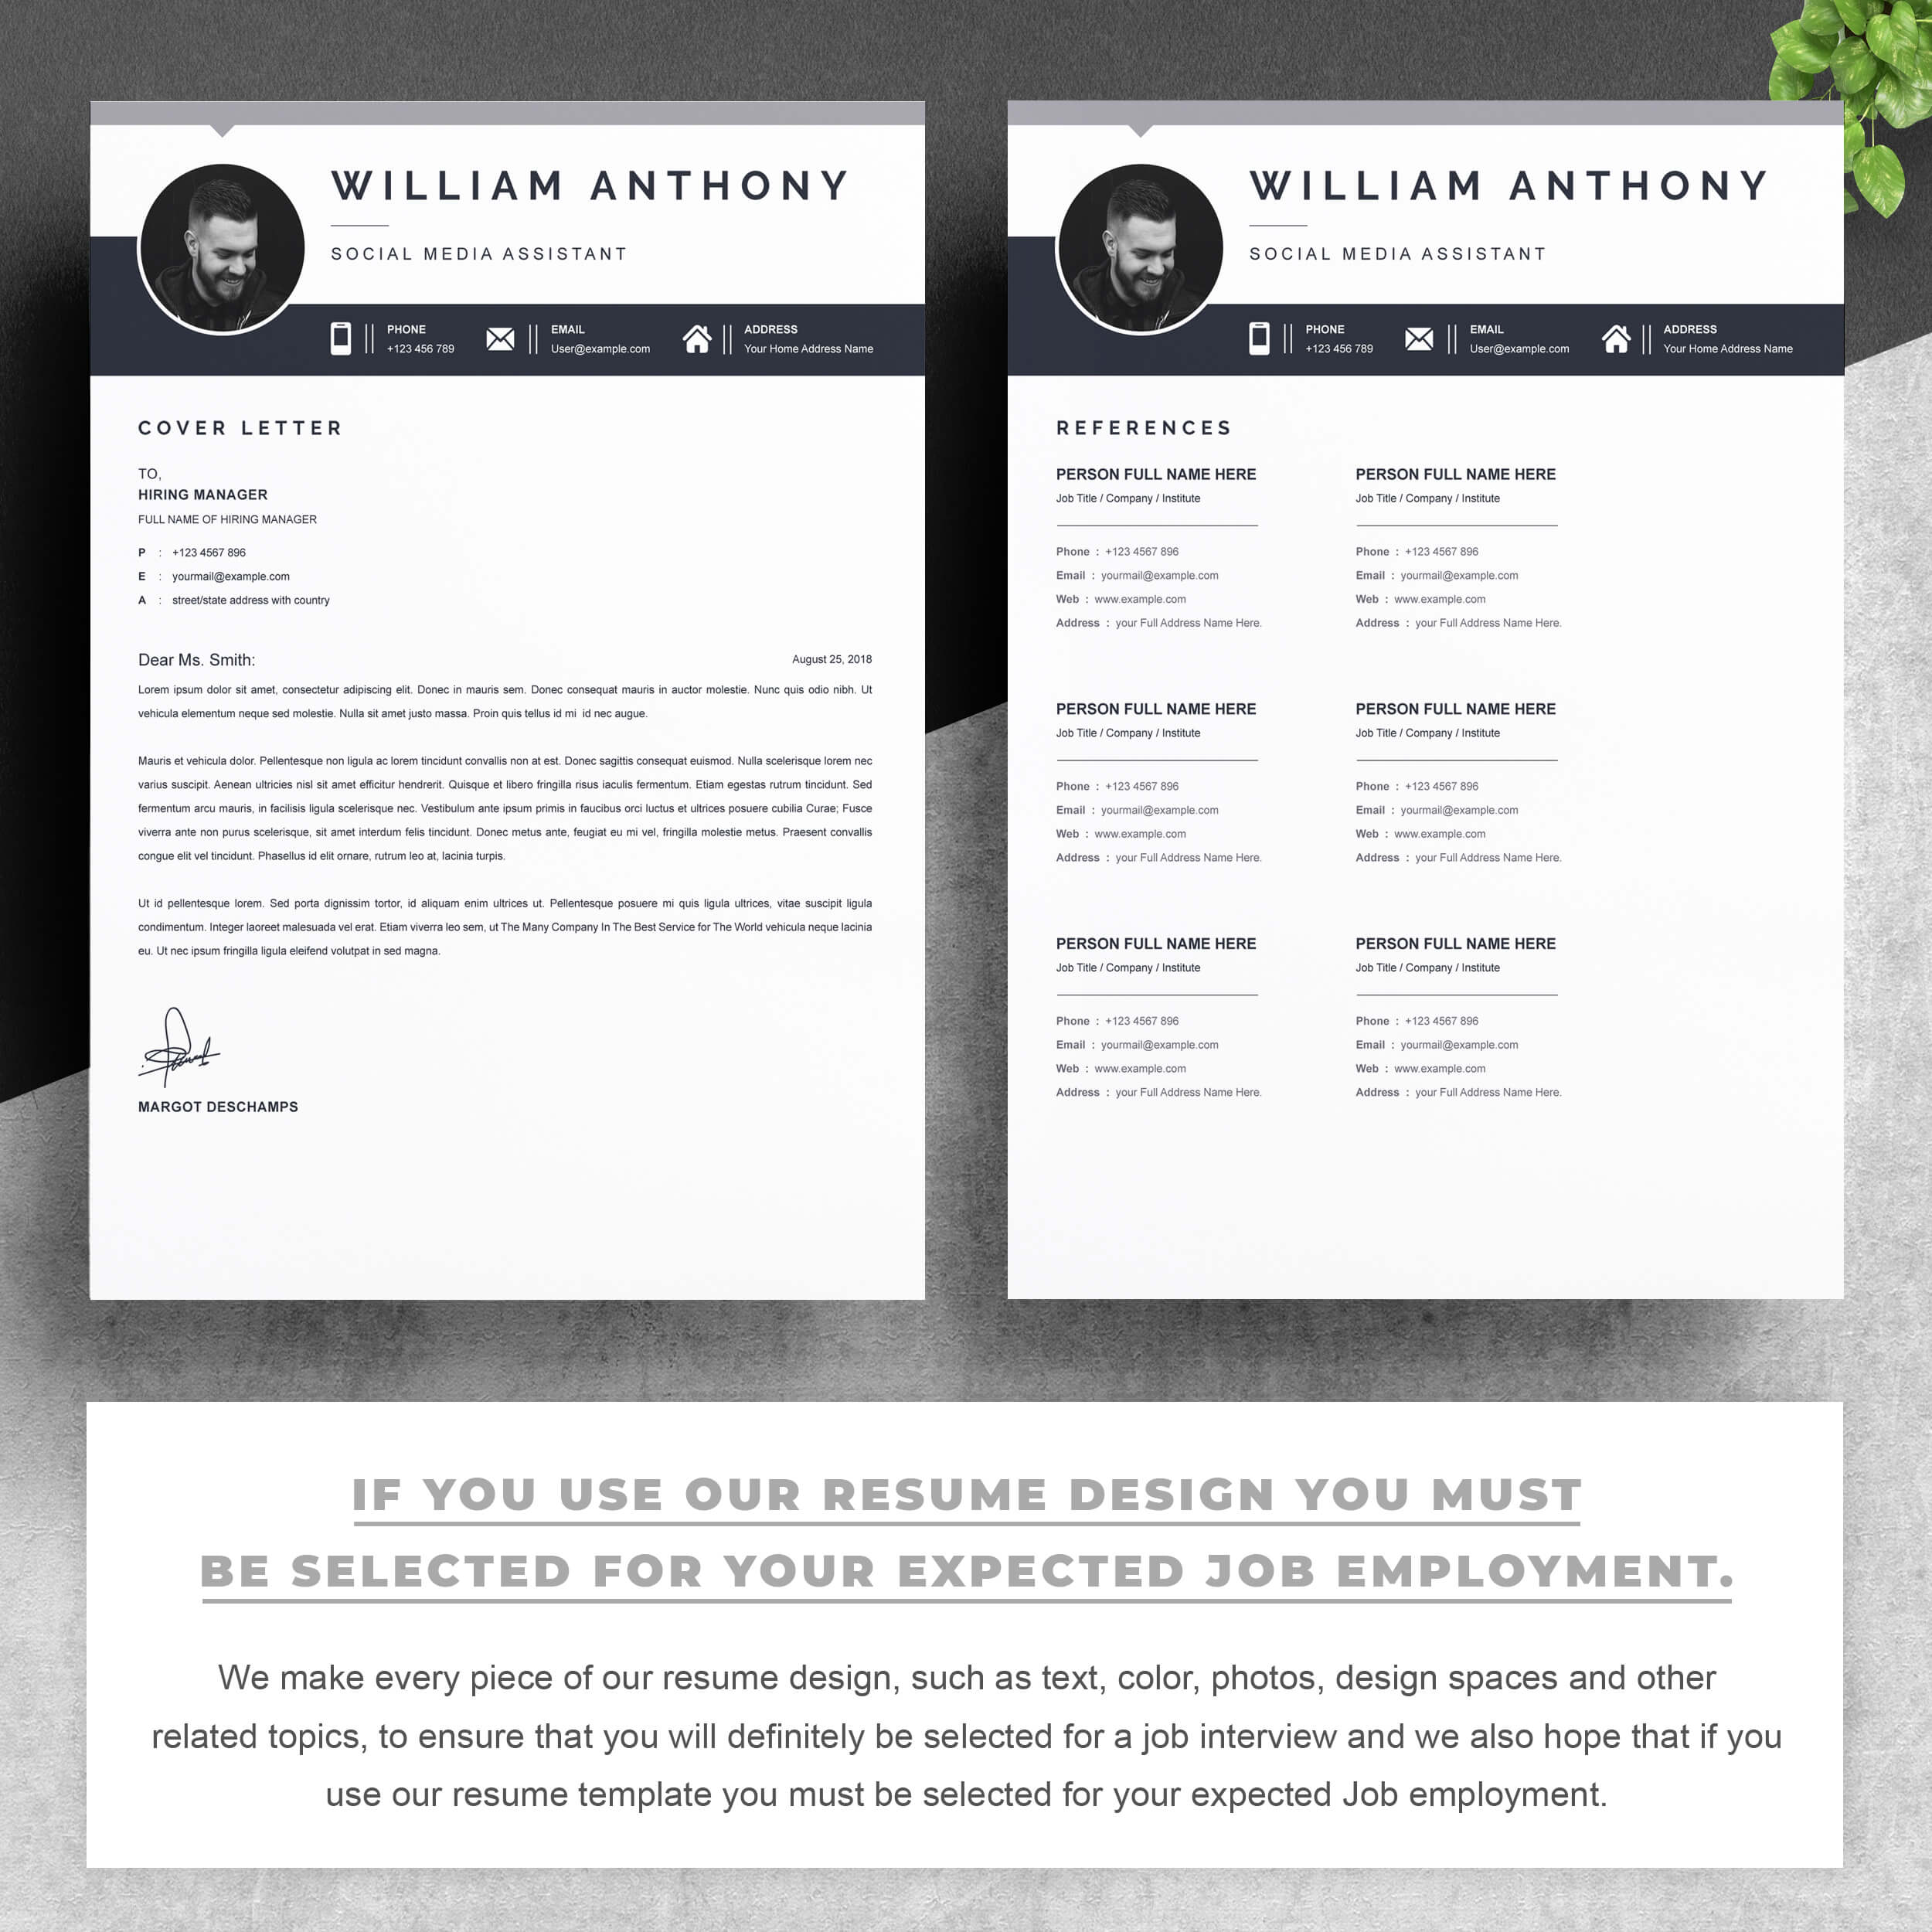 03 2 pages free resume design template copy 1 551